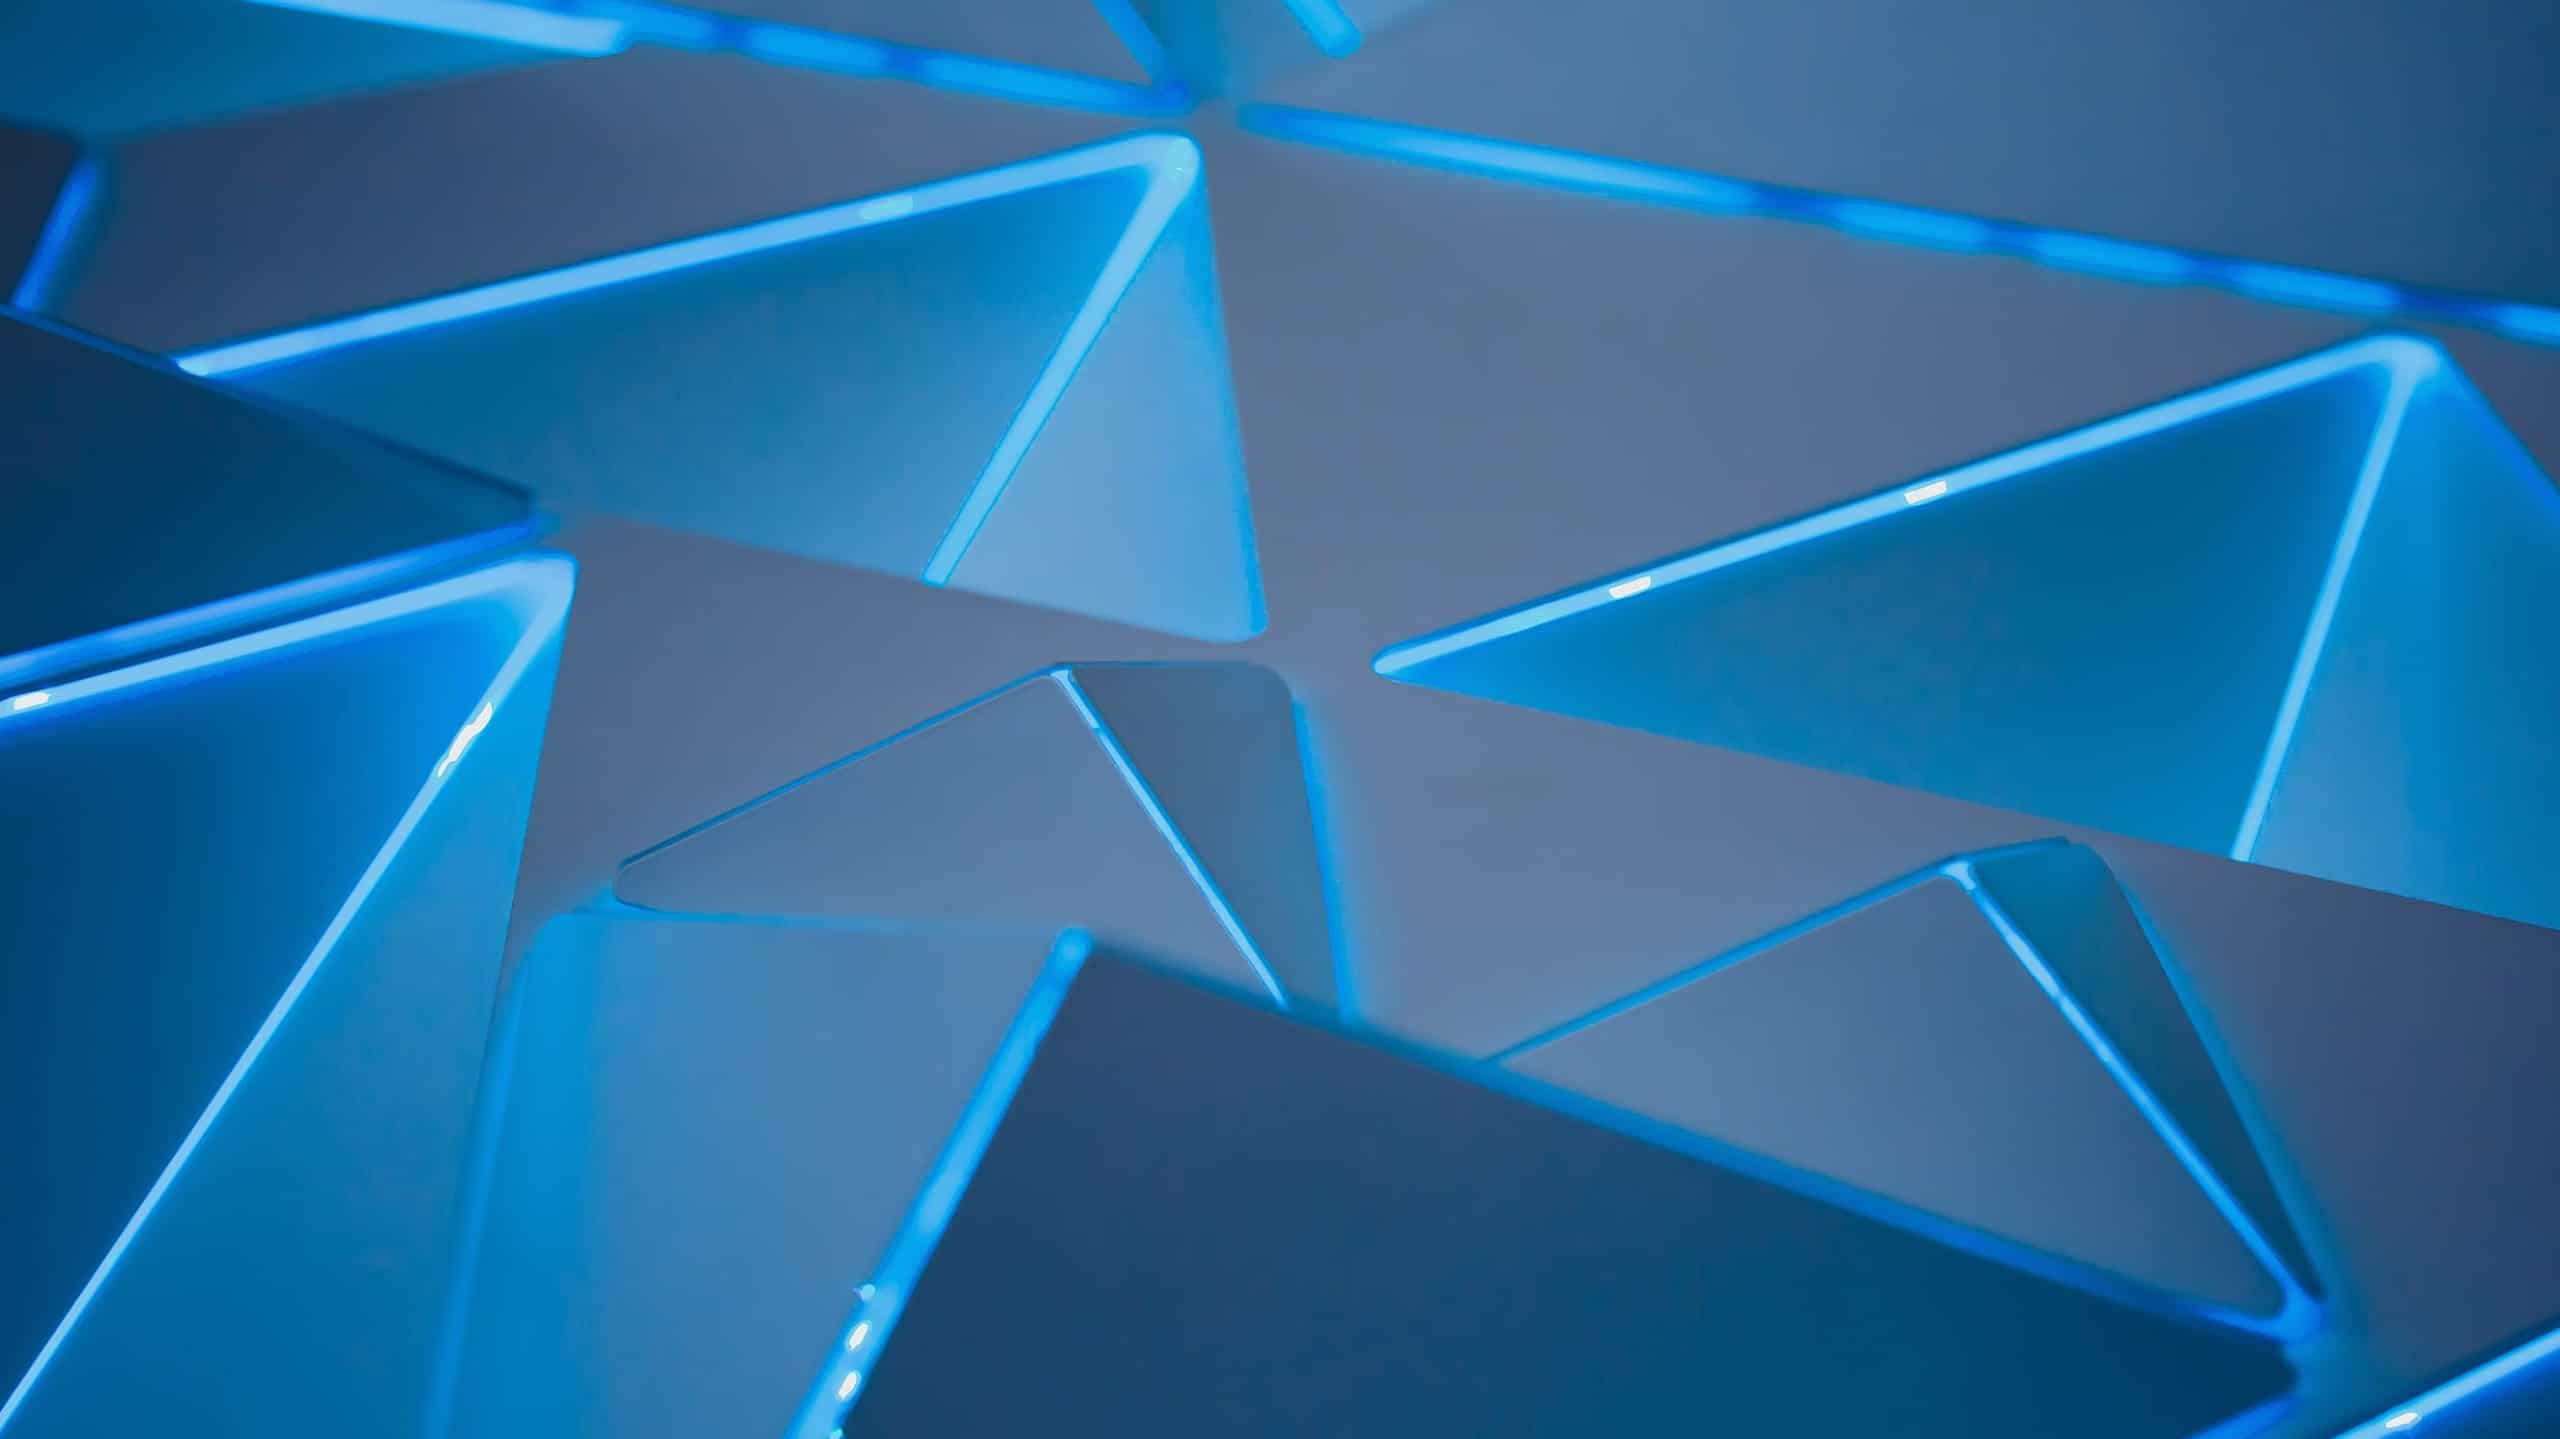 Abstract image featuring a pattern of overlapping blue triangles with soft lighting, creating a futuristic and geometric aesthetic.